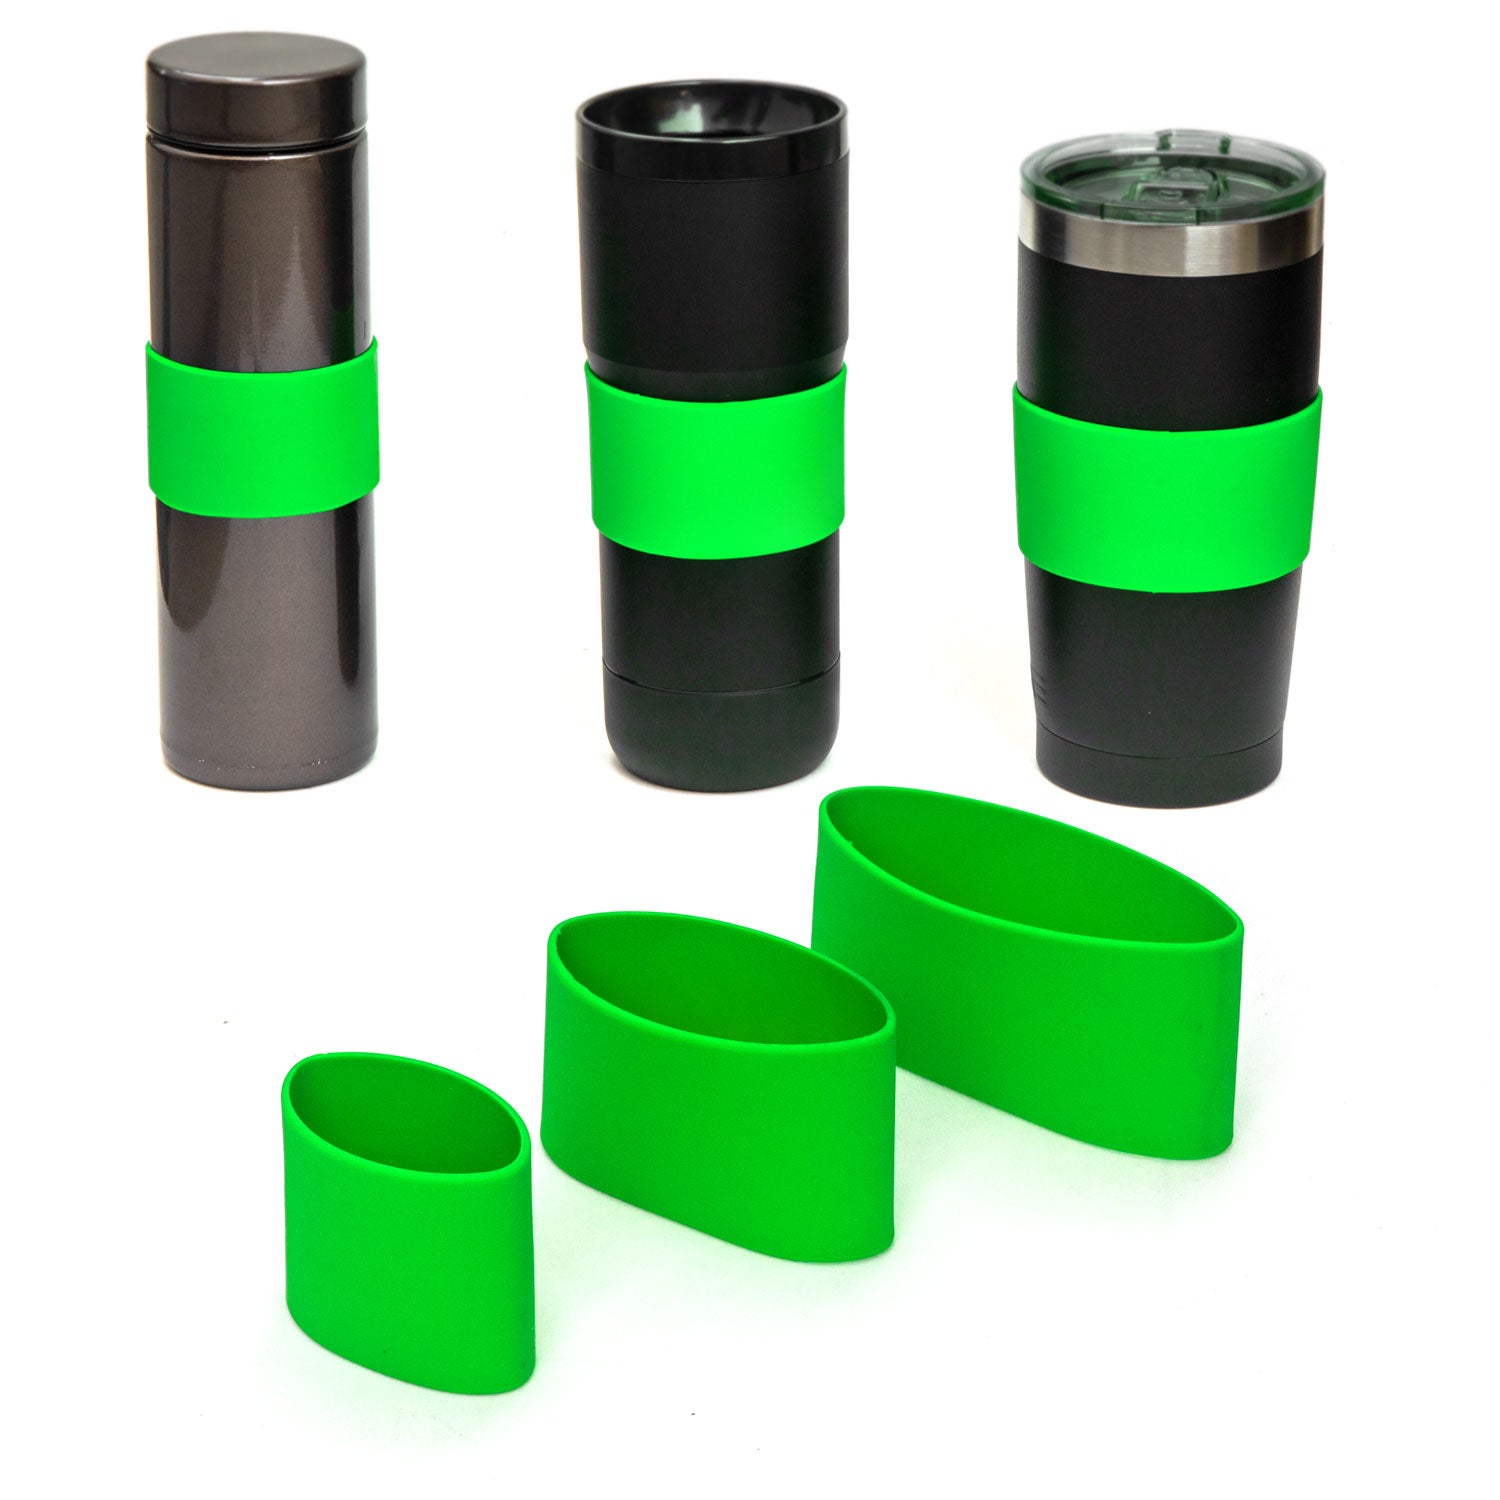 Grifiti Band Joes Silicone Grip Bands 3 Pack Assorted Sizes Mugs Cups Bottles Knobs Dumbbells - Grifiti